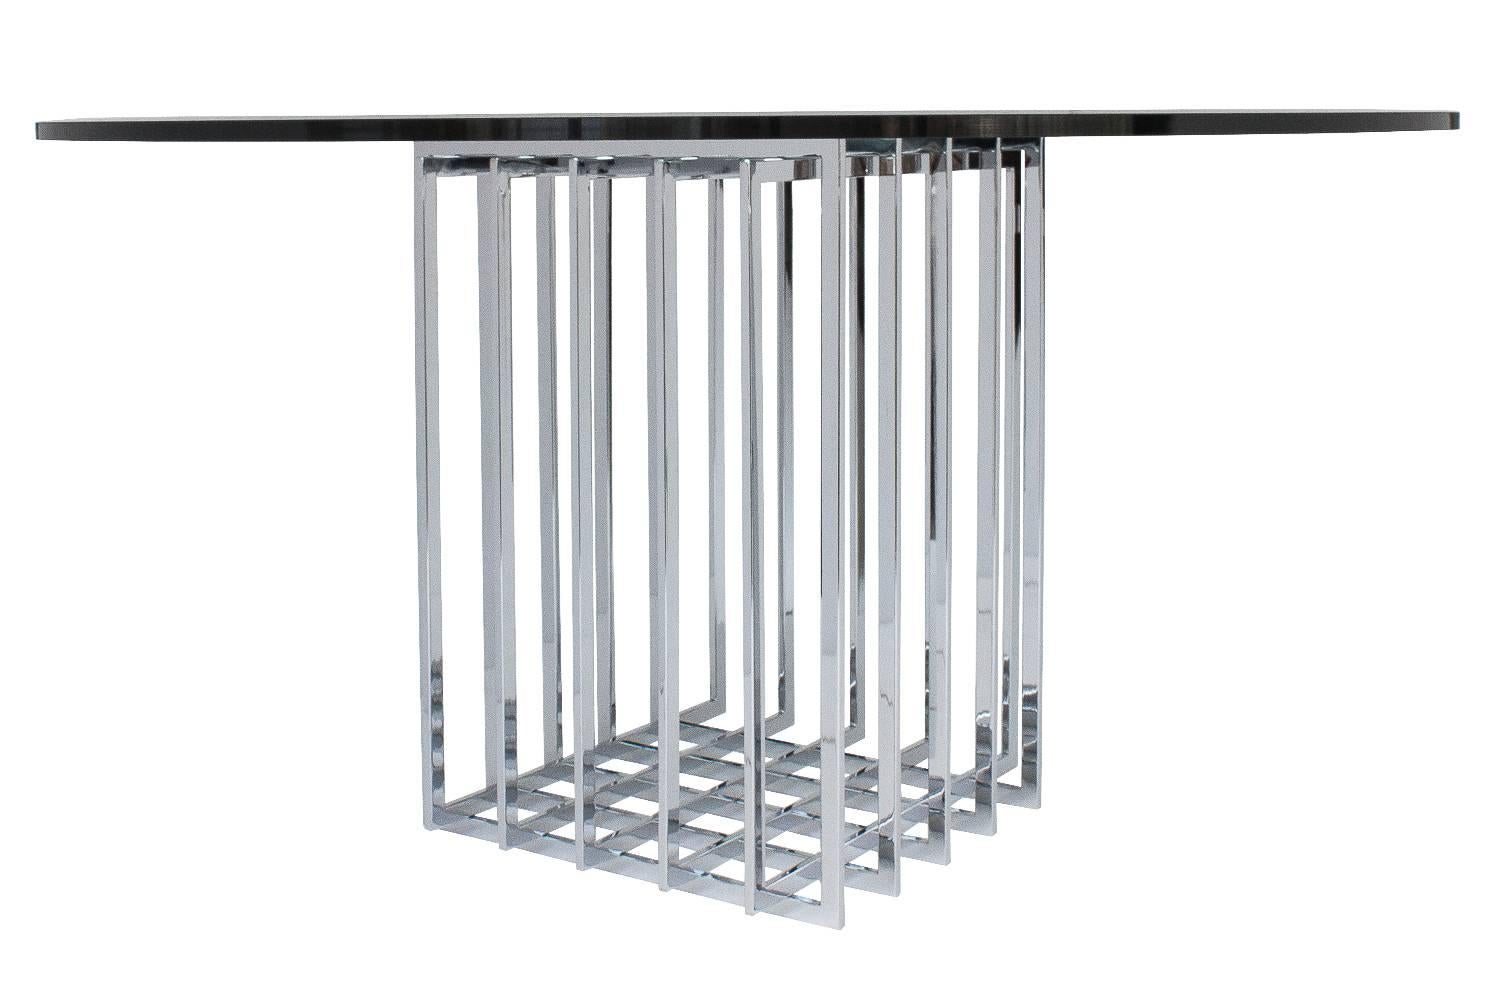 This Pierre Cardin table design features a grid form cage comprised of chrome-plated steel bars. The base is quite heavy. The glass top is 3/4